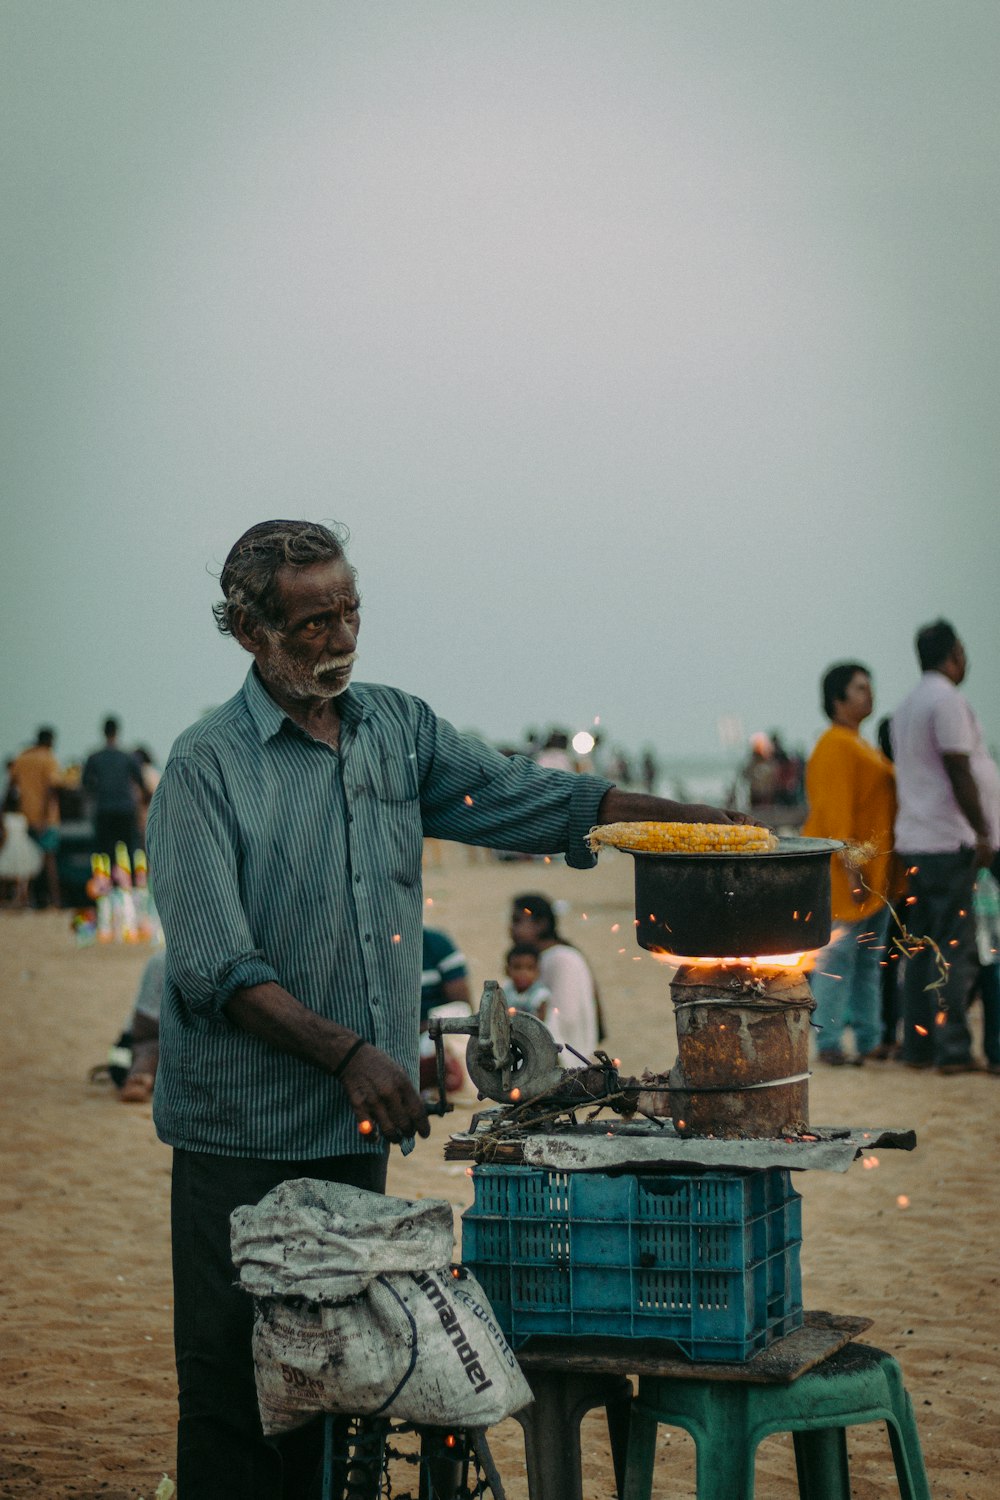 a man pushing a cart with food